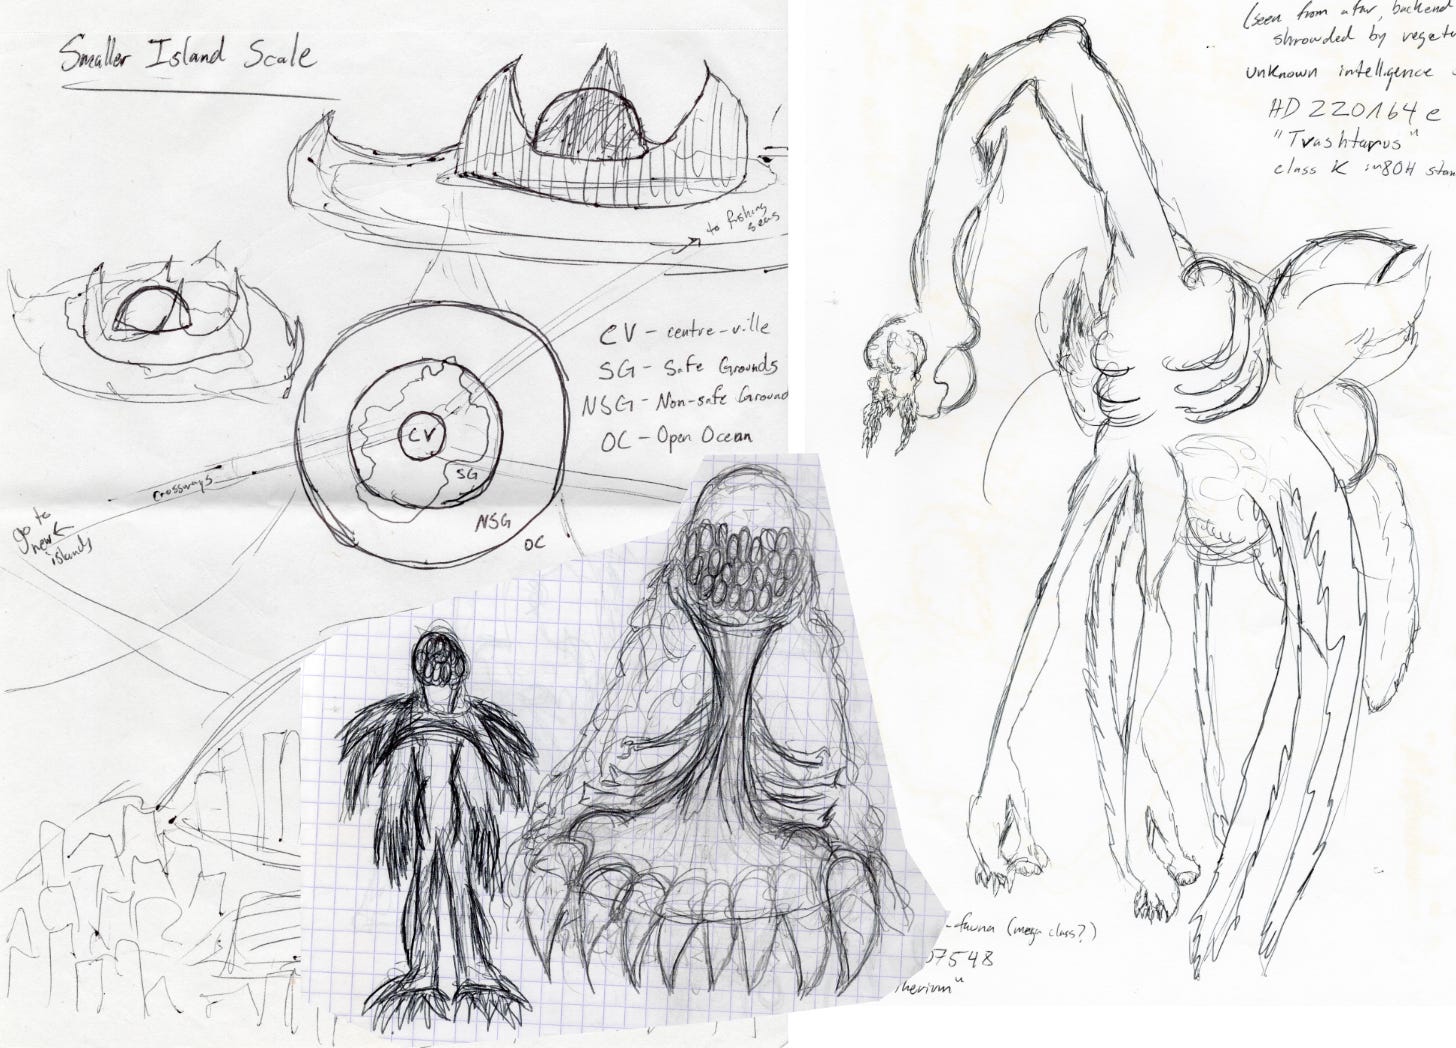 Three sketches. Two different aliens and an alien city map. One alien pair is a slug-like stalker and its humanoid companion. The other alien’s face is an indiscernible collection of sensory organs at the end of an arm-and-elbow sort of neck; its body and limbs are sorta bug-like with a mammalian-esque ribcage. The map is an overview sketch of an island and how the concentric circles of the city divide it.